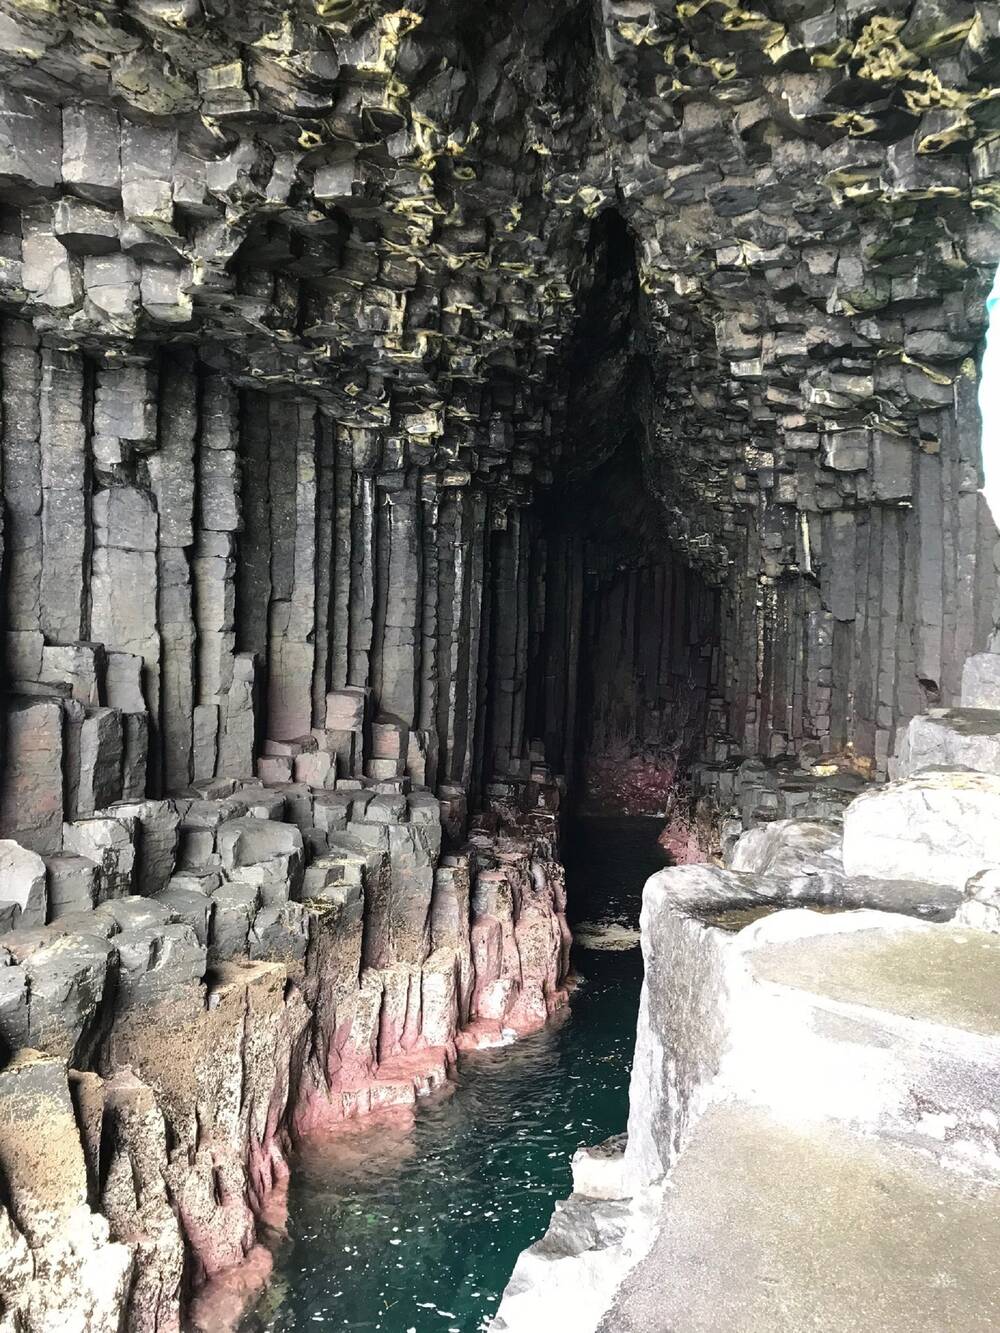 A view looking into a cave, with turquoise water at the bottom. The walls are made up of columns of rock, rather like row upon row of Kit-Kats!